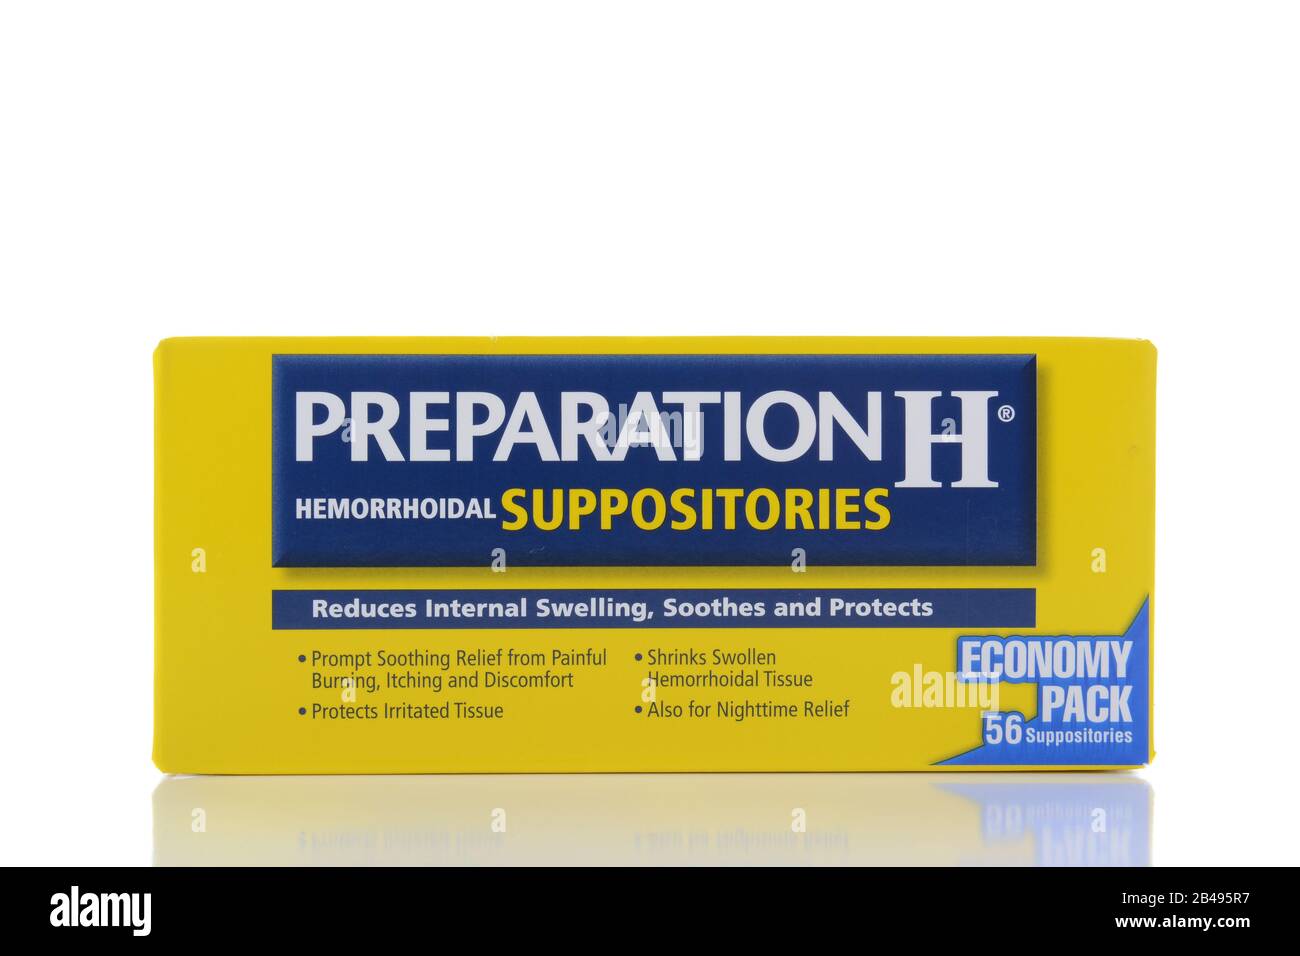 IRVINE, CA - AUGUST 15, 2016: A box of Preparation H Suppositories for the treatment of hemorrhoids. Stock Photo